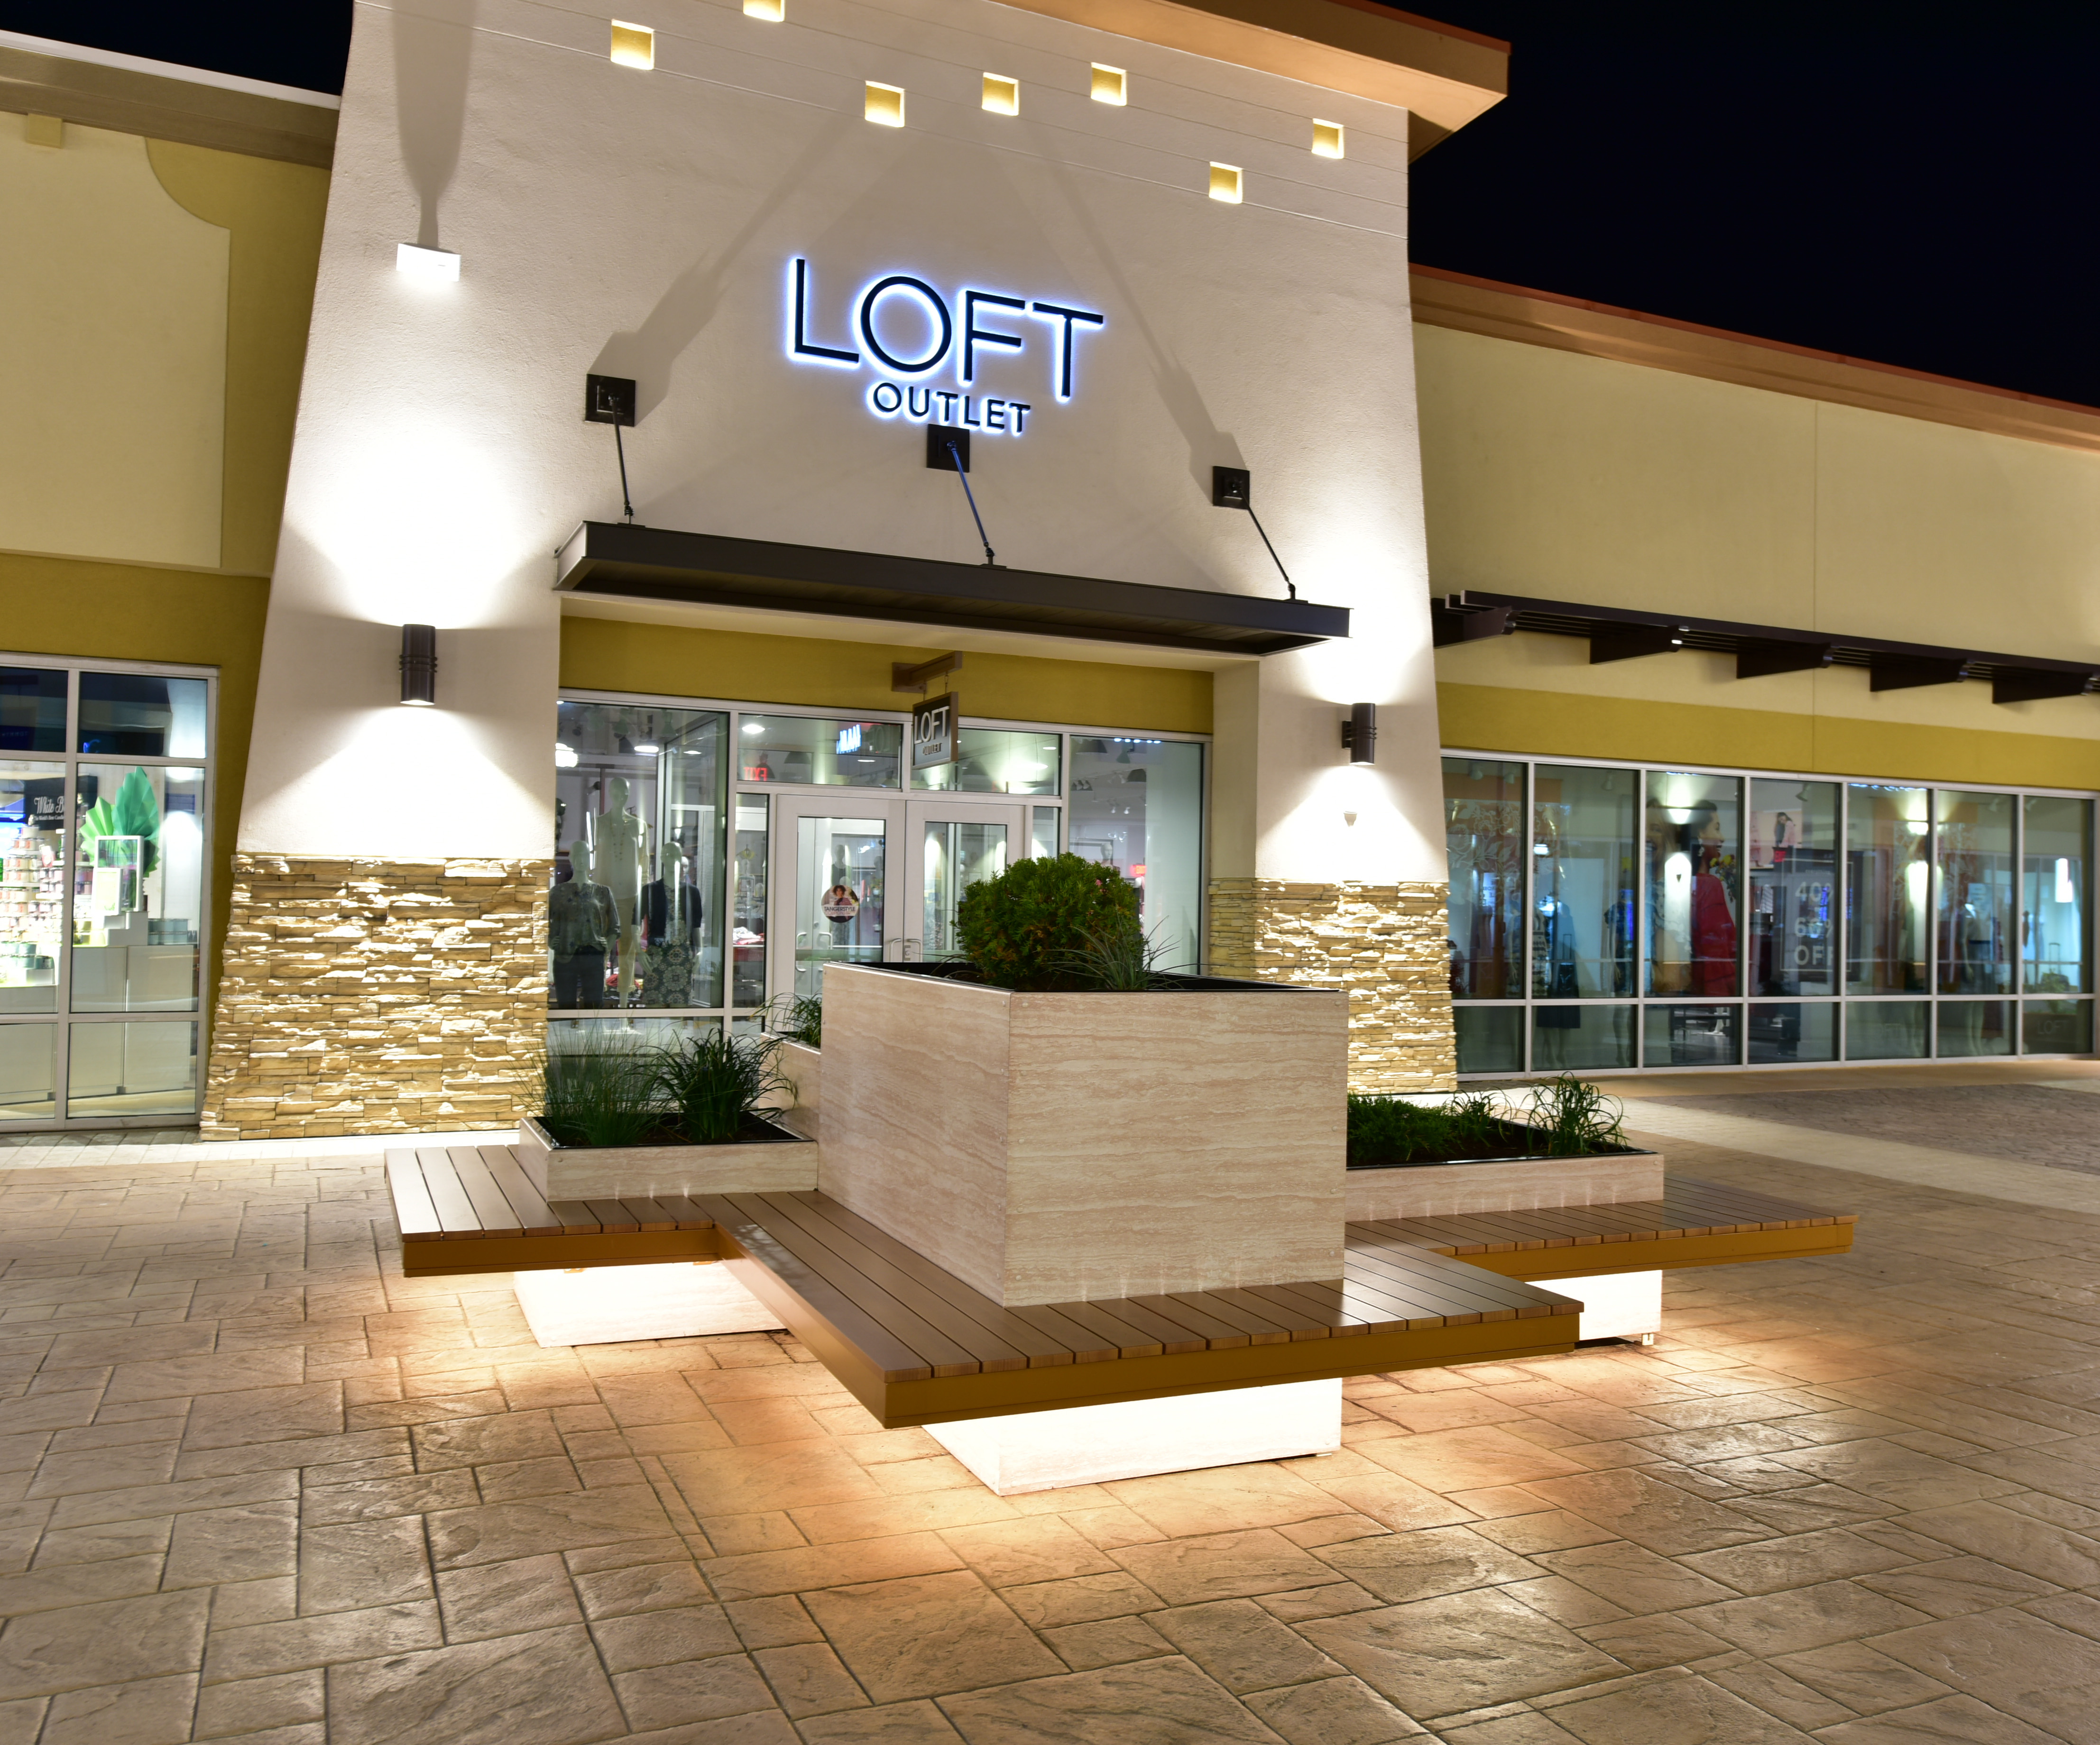 LOFT OUTLET - 2200 Tanger Blvd, Washington, Pennsylvania - Accessories -  Phone Number - Yelp